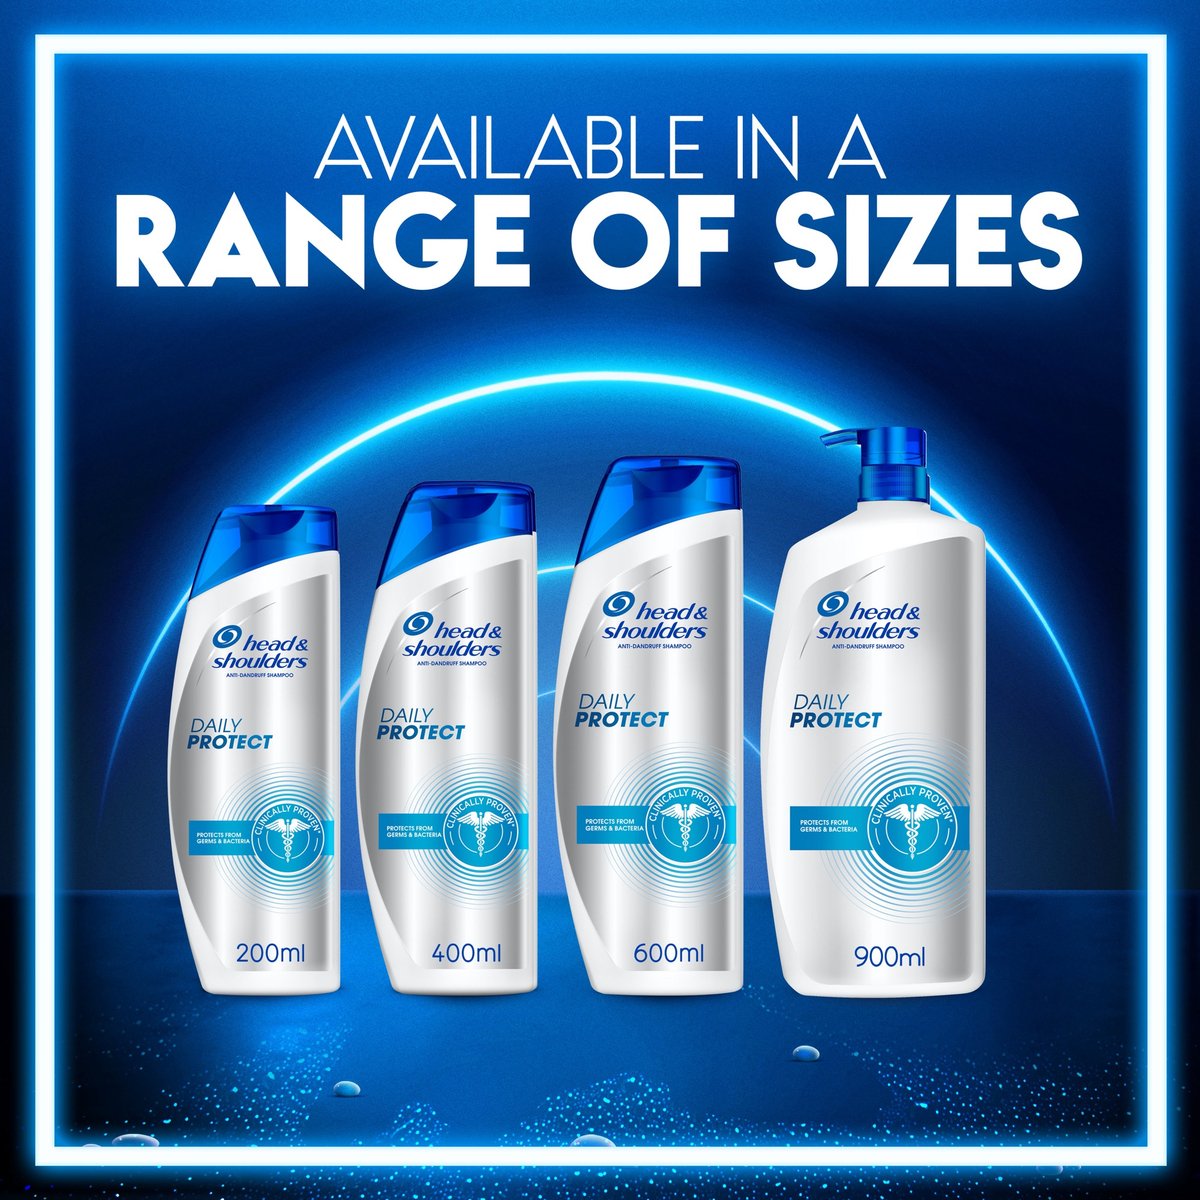 Head & Shoulders Daily Protect Anti-Dandruff Shampoo For Germs & Bacteria Protection 200ml